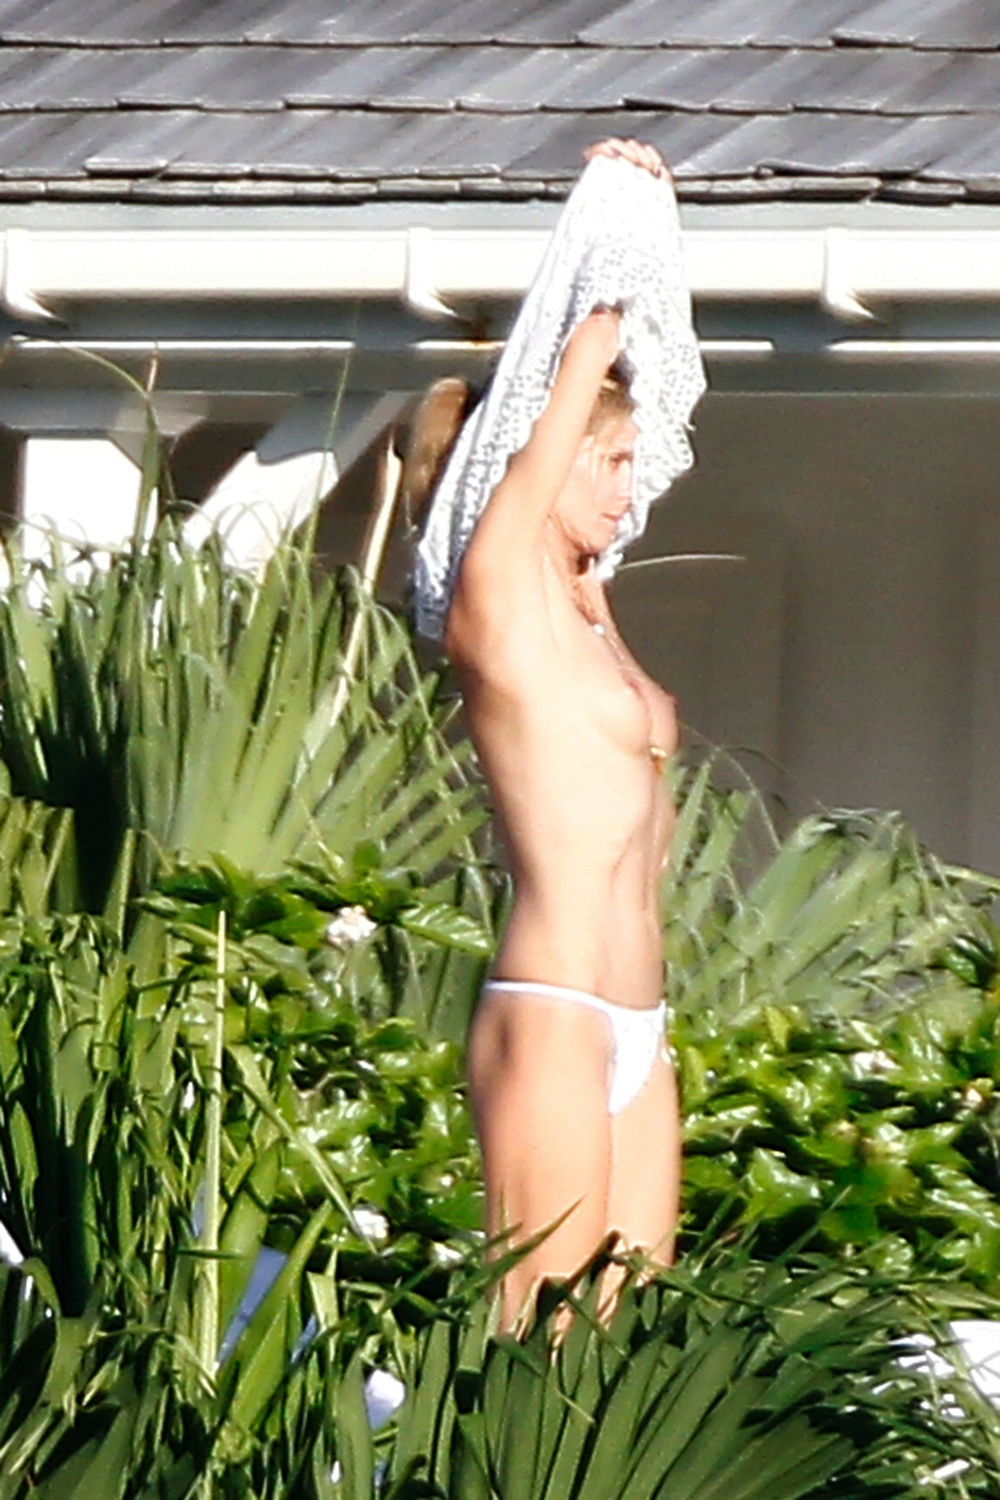 PAP12141056 HEIDI KLUM IN ST BARTS STROLLING TOPLESS IN THEIR RENTAL HOME VISIBLE FROM THE PUBLIC BEACH FROM EVERYBODY